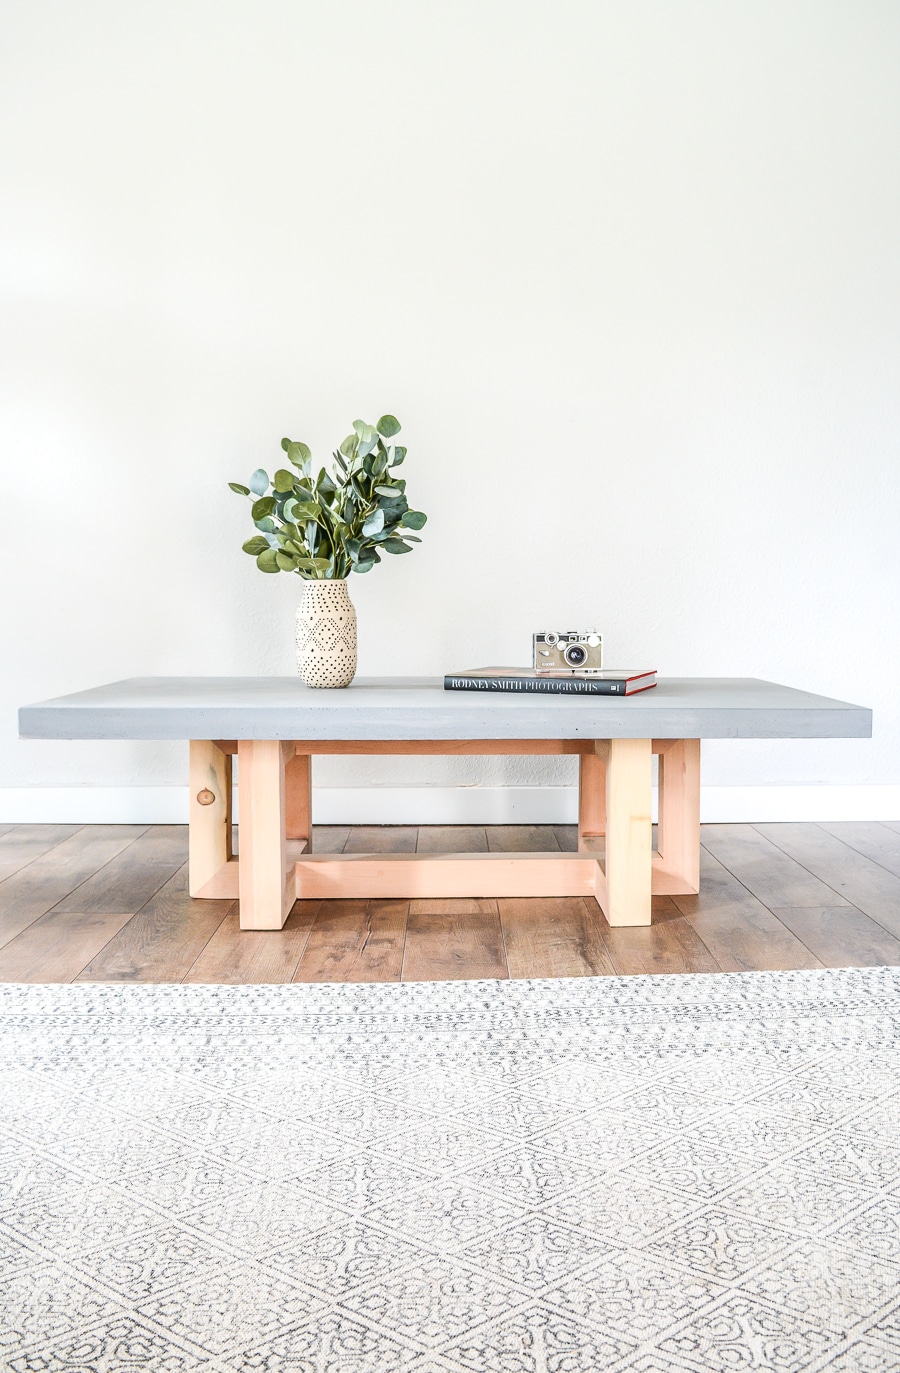 How to make a DIY coffee table with a concrete top